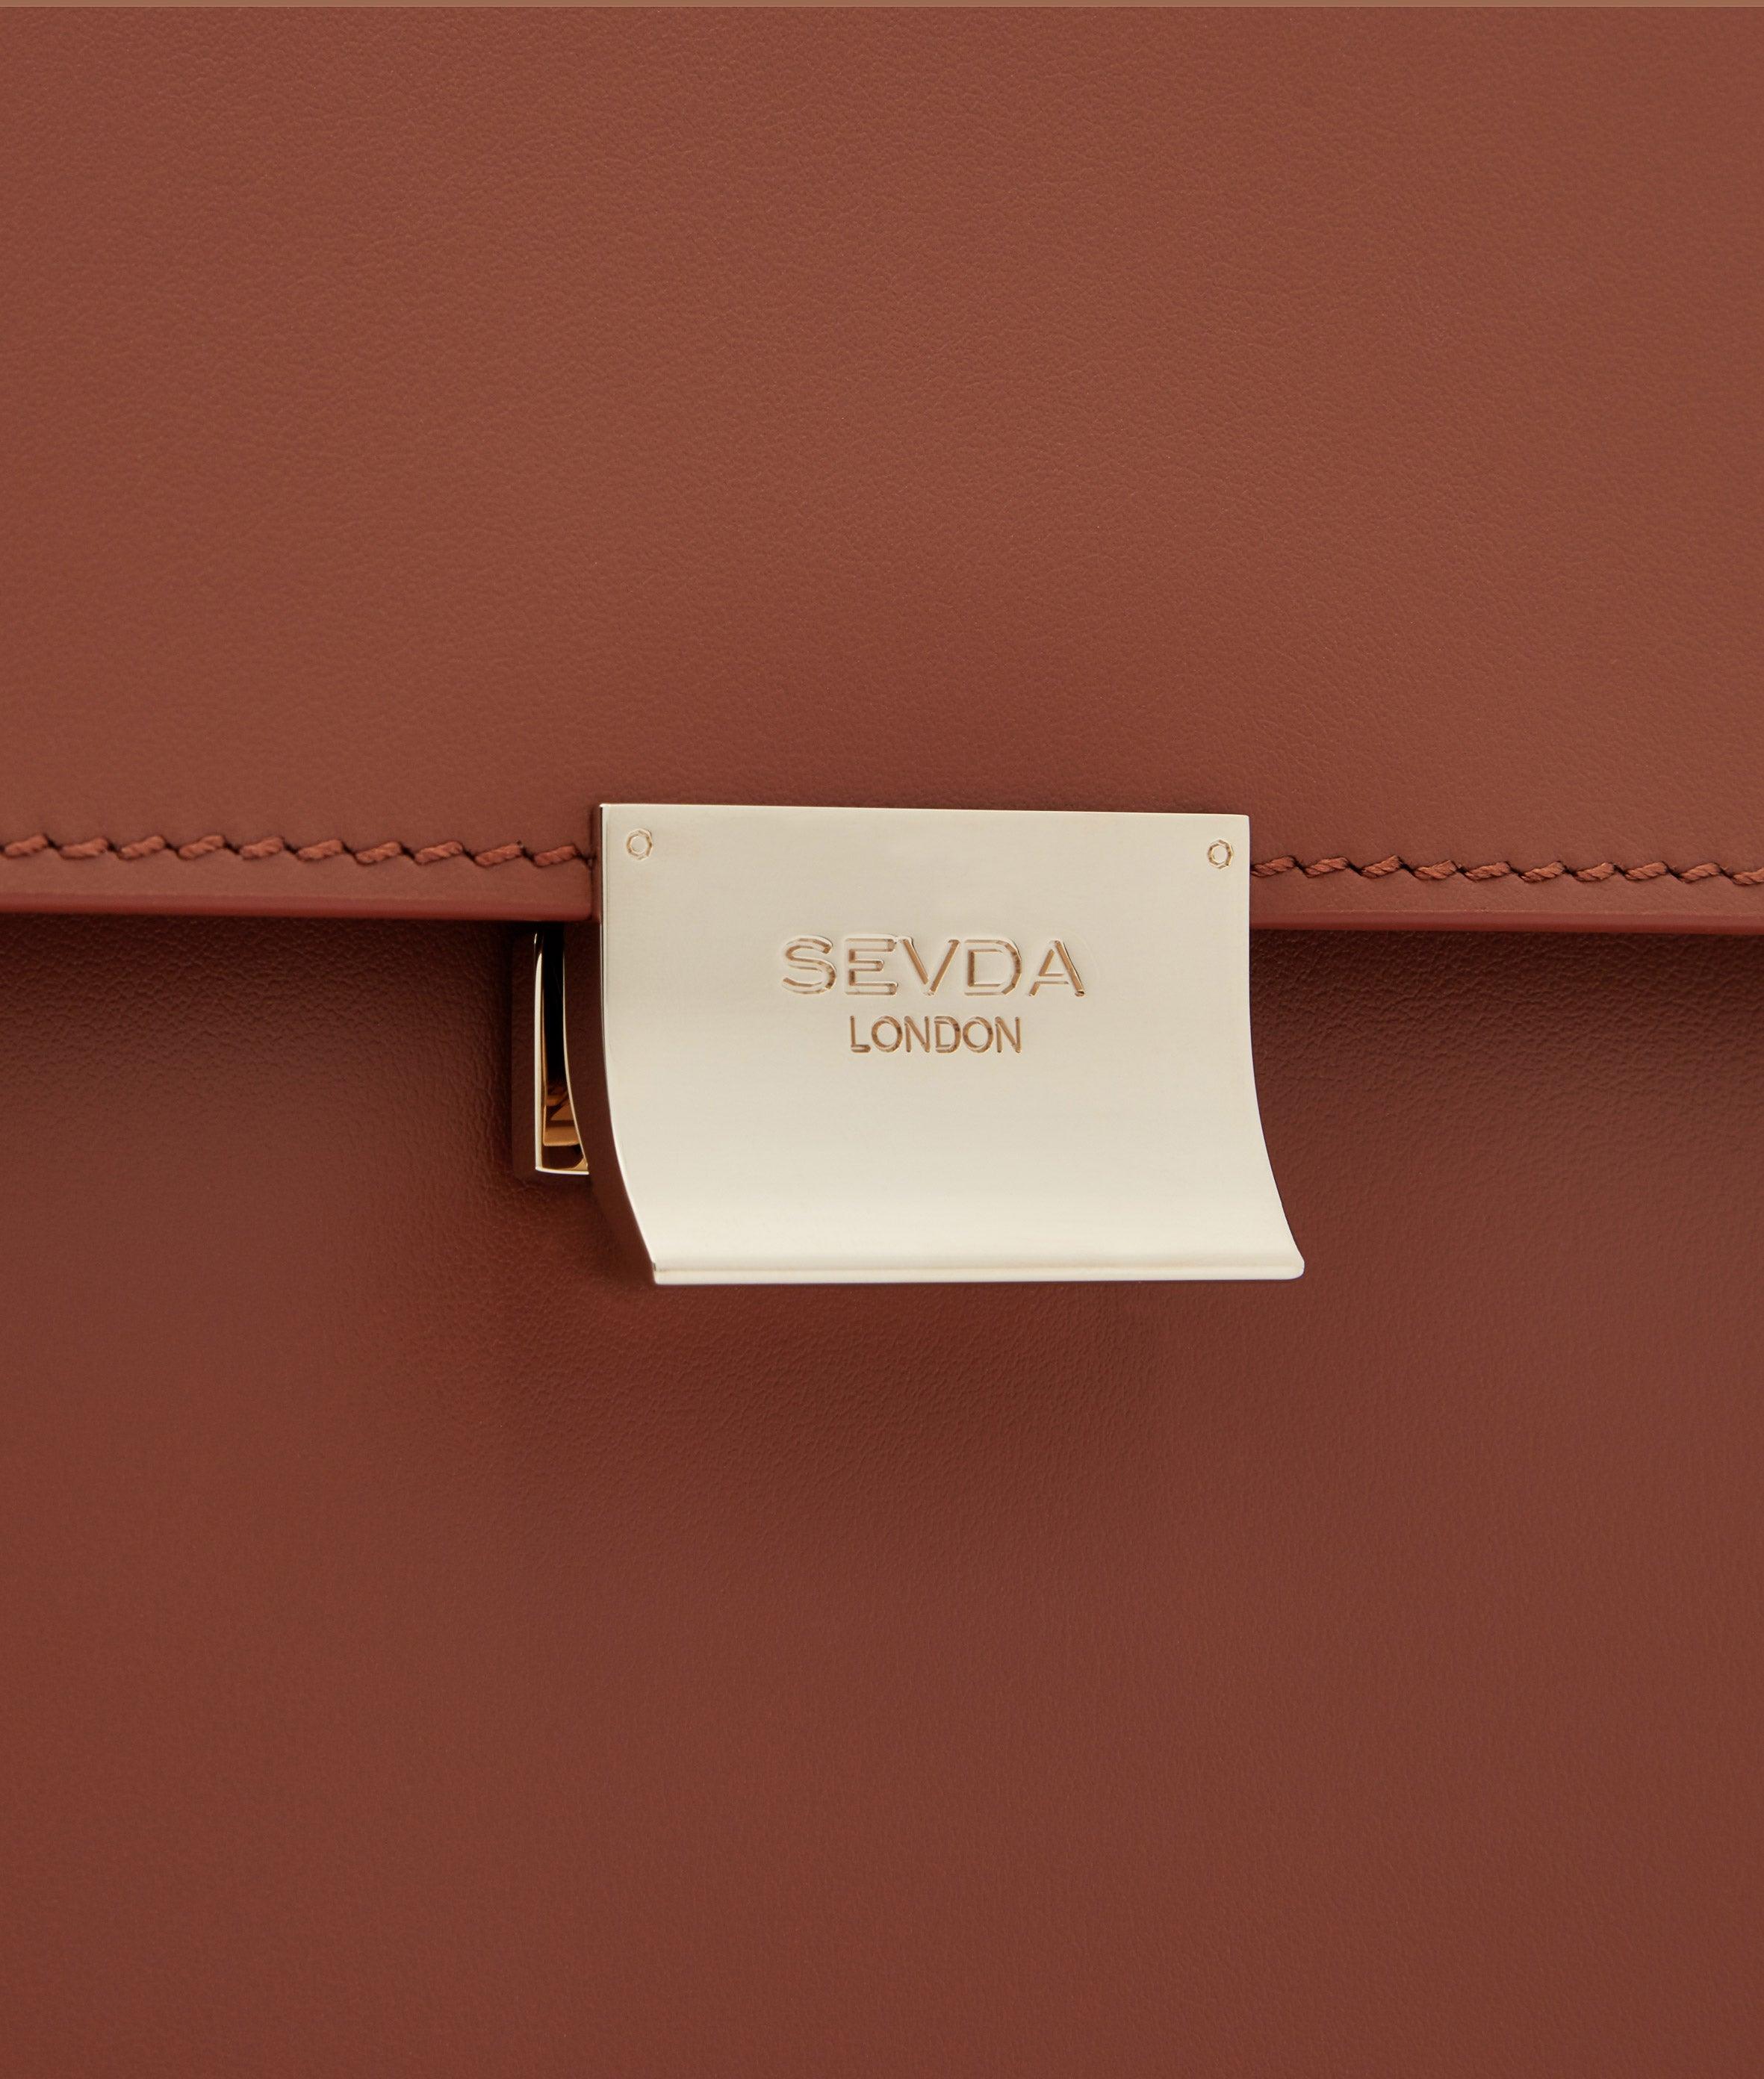 Tan Leather Designer Shoulder Bag - A fusion of London's style and Italian craftsmanship.